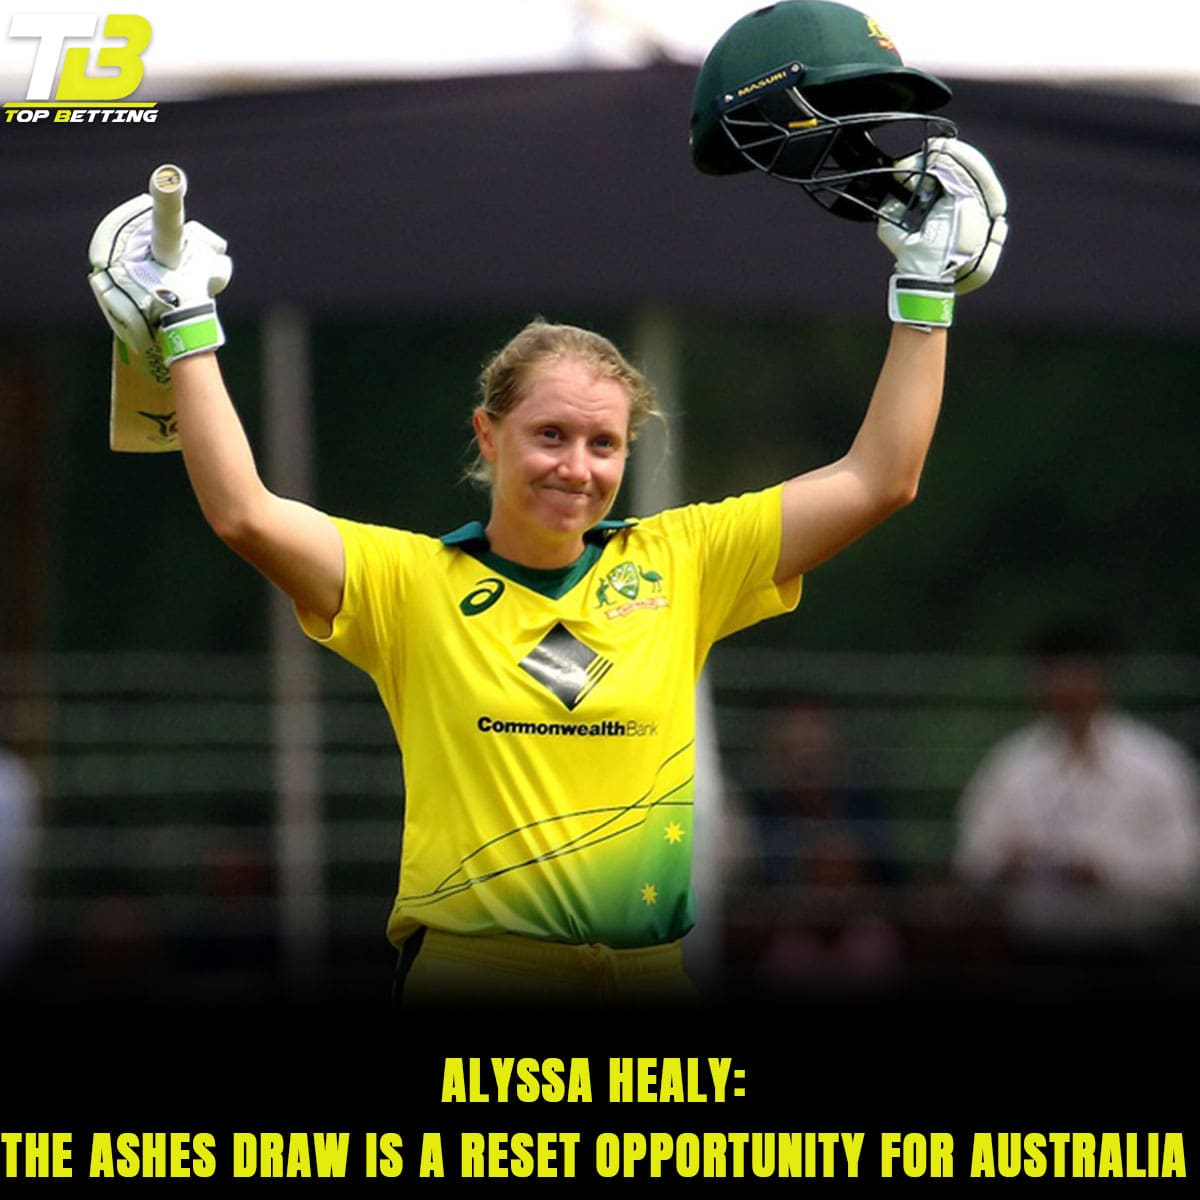 Alyssa Healy: The Ashes draw is a reset opportunity for Australia